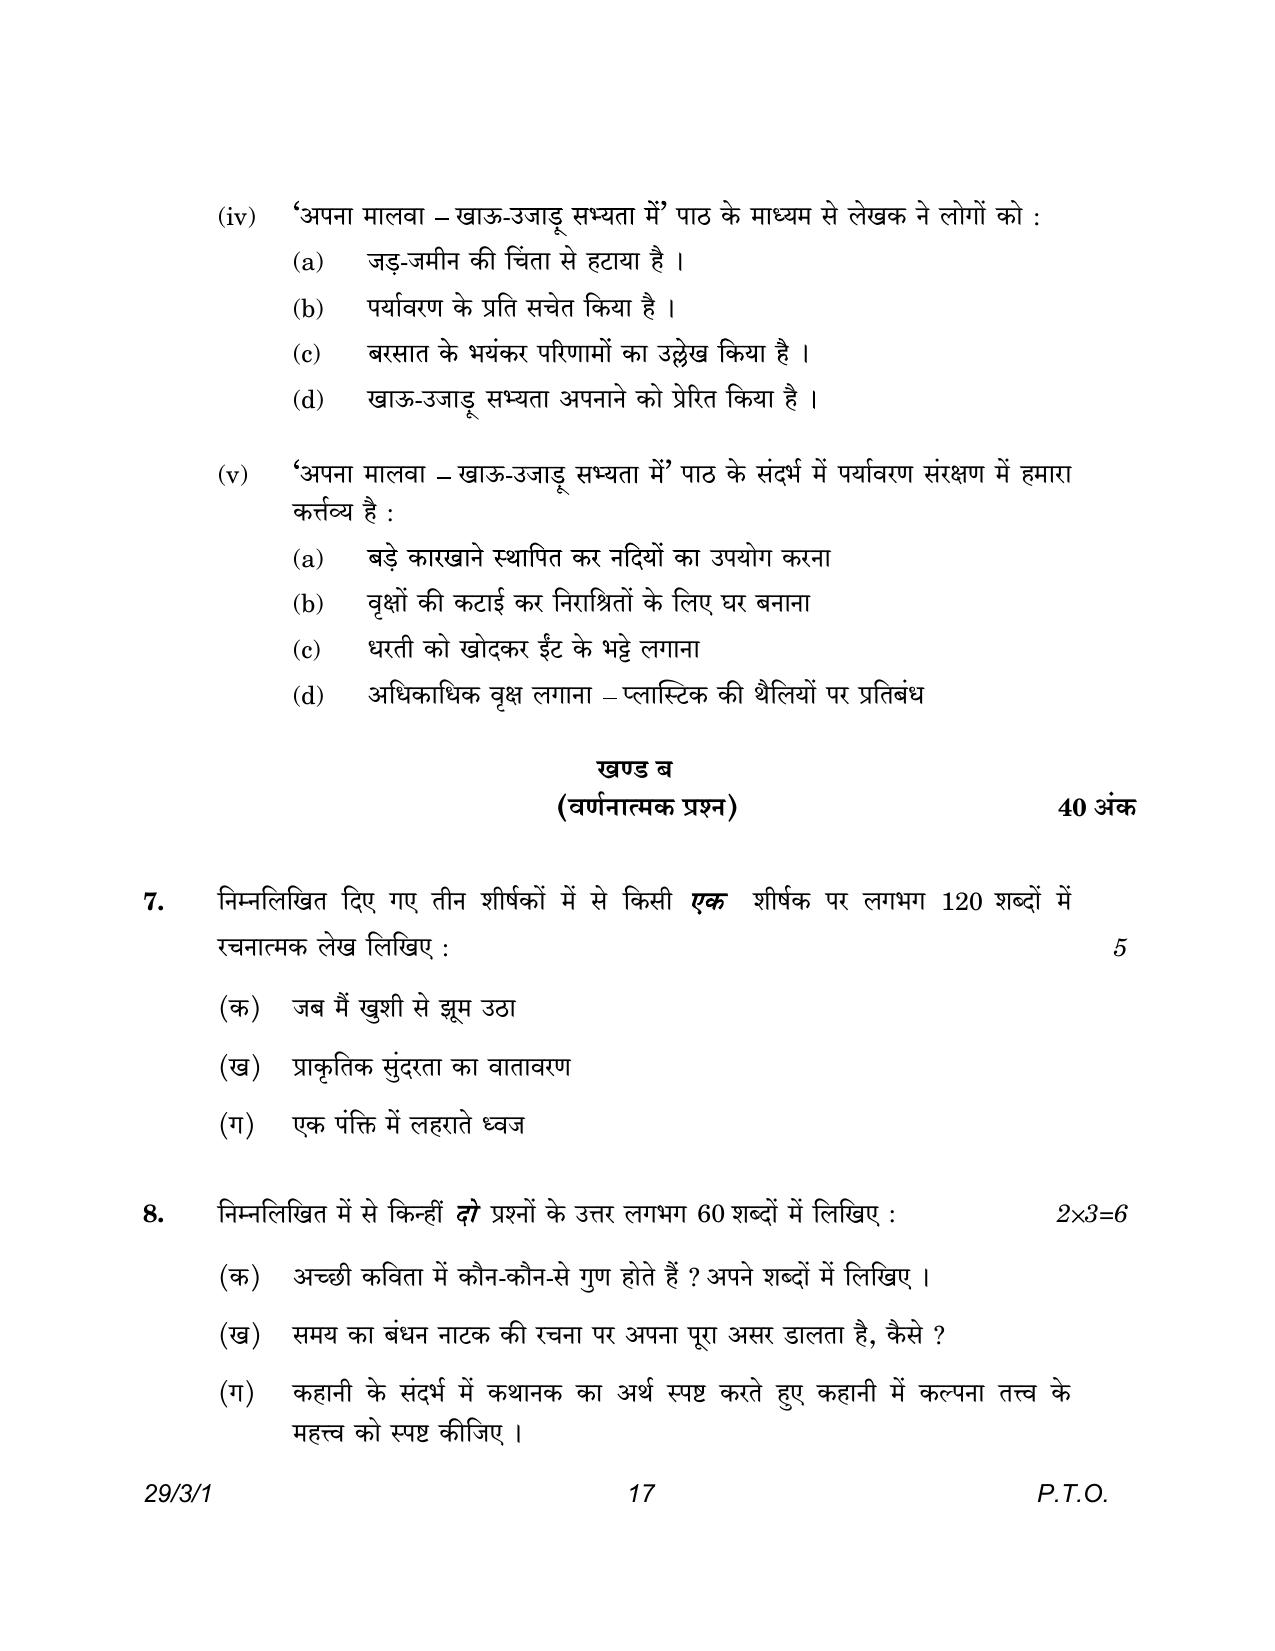 CBSE Class 12 29-3-1 Hindi Elective 2023 Question Paper - Page 17